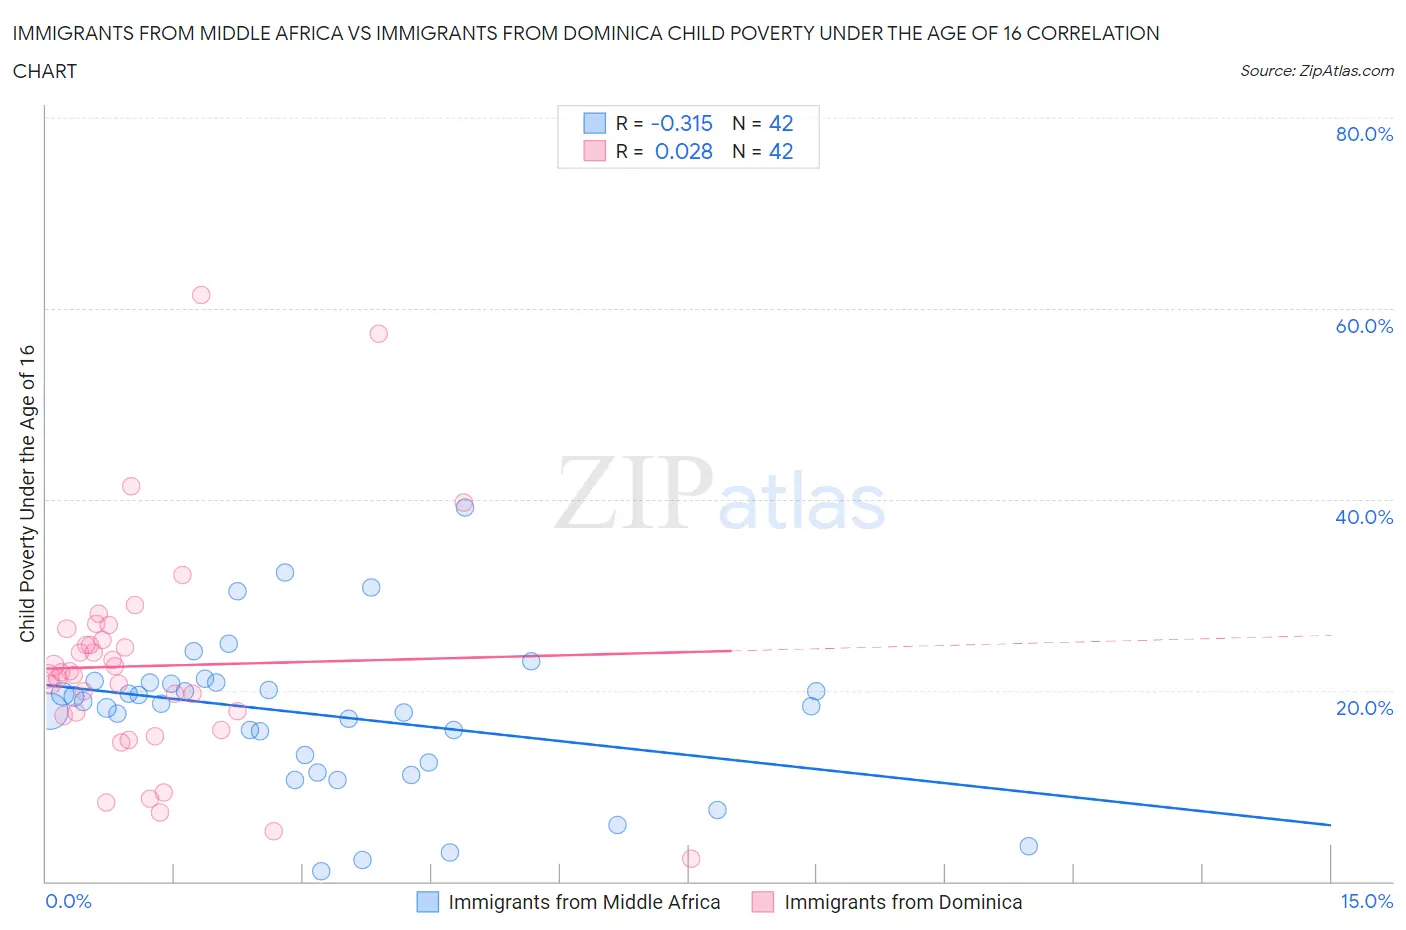 Immigrants from Middle Africa vs Immigrants from Dominica Child Poverty Under the Age of 16